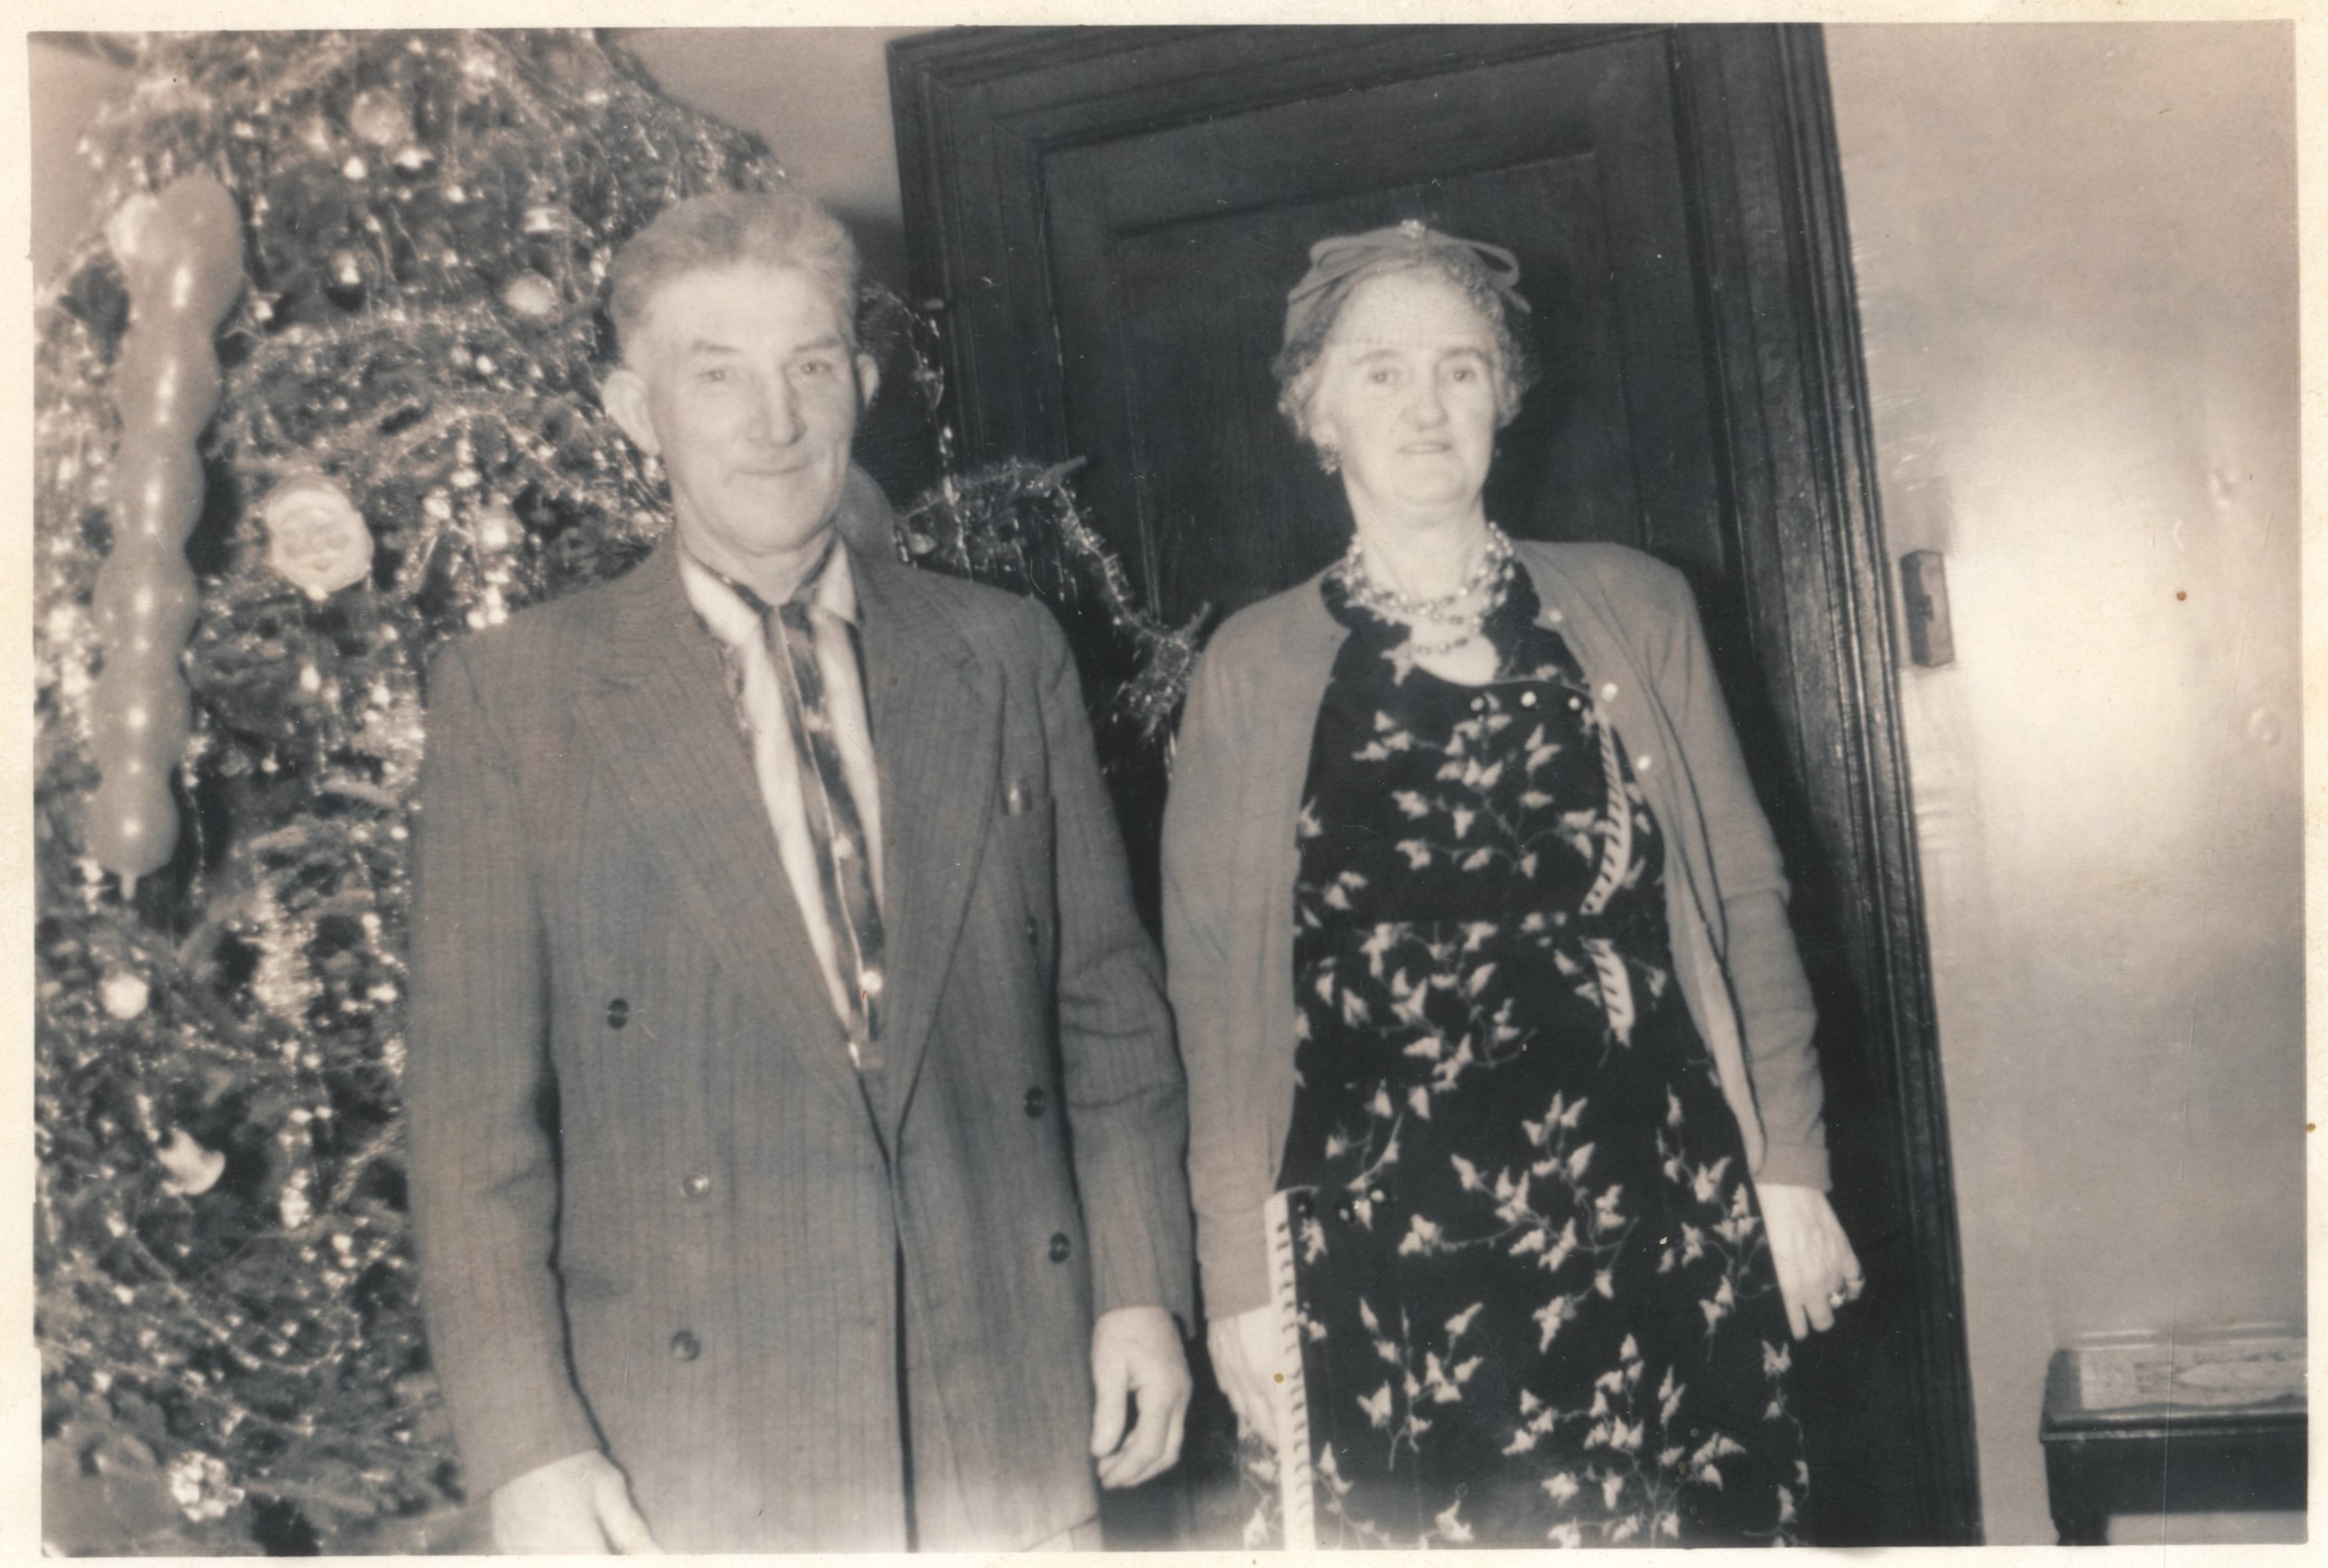 Black and white archival photograph of a man in a suit, and a woman in a dress, cardigan, hat, and necklace standing in front of Christmas tree covered in tinsel and ornaments.